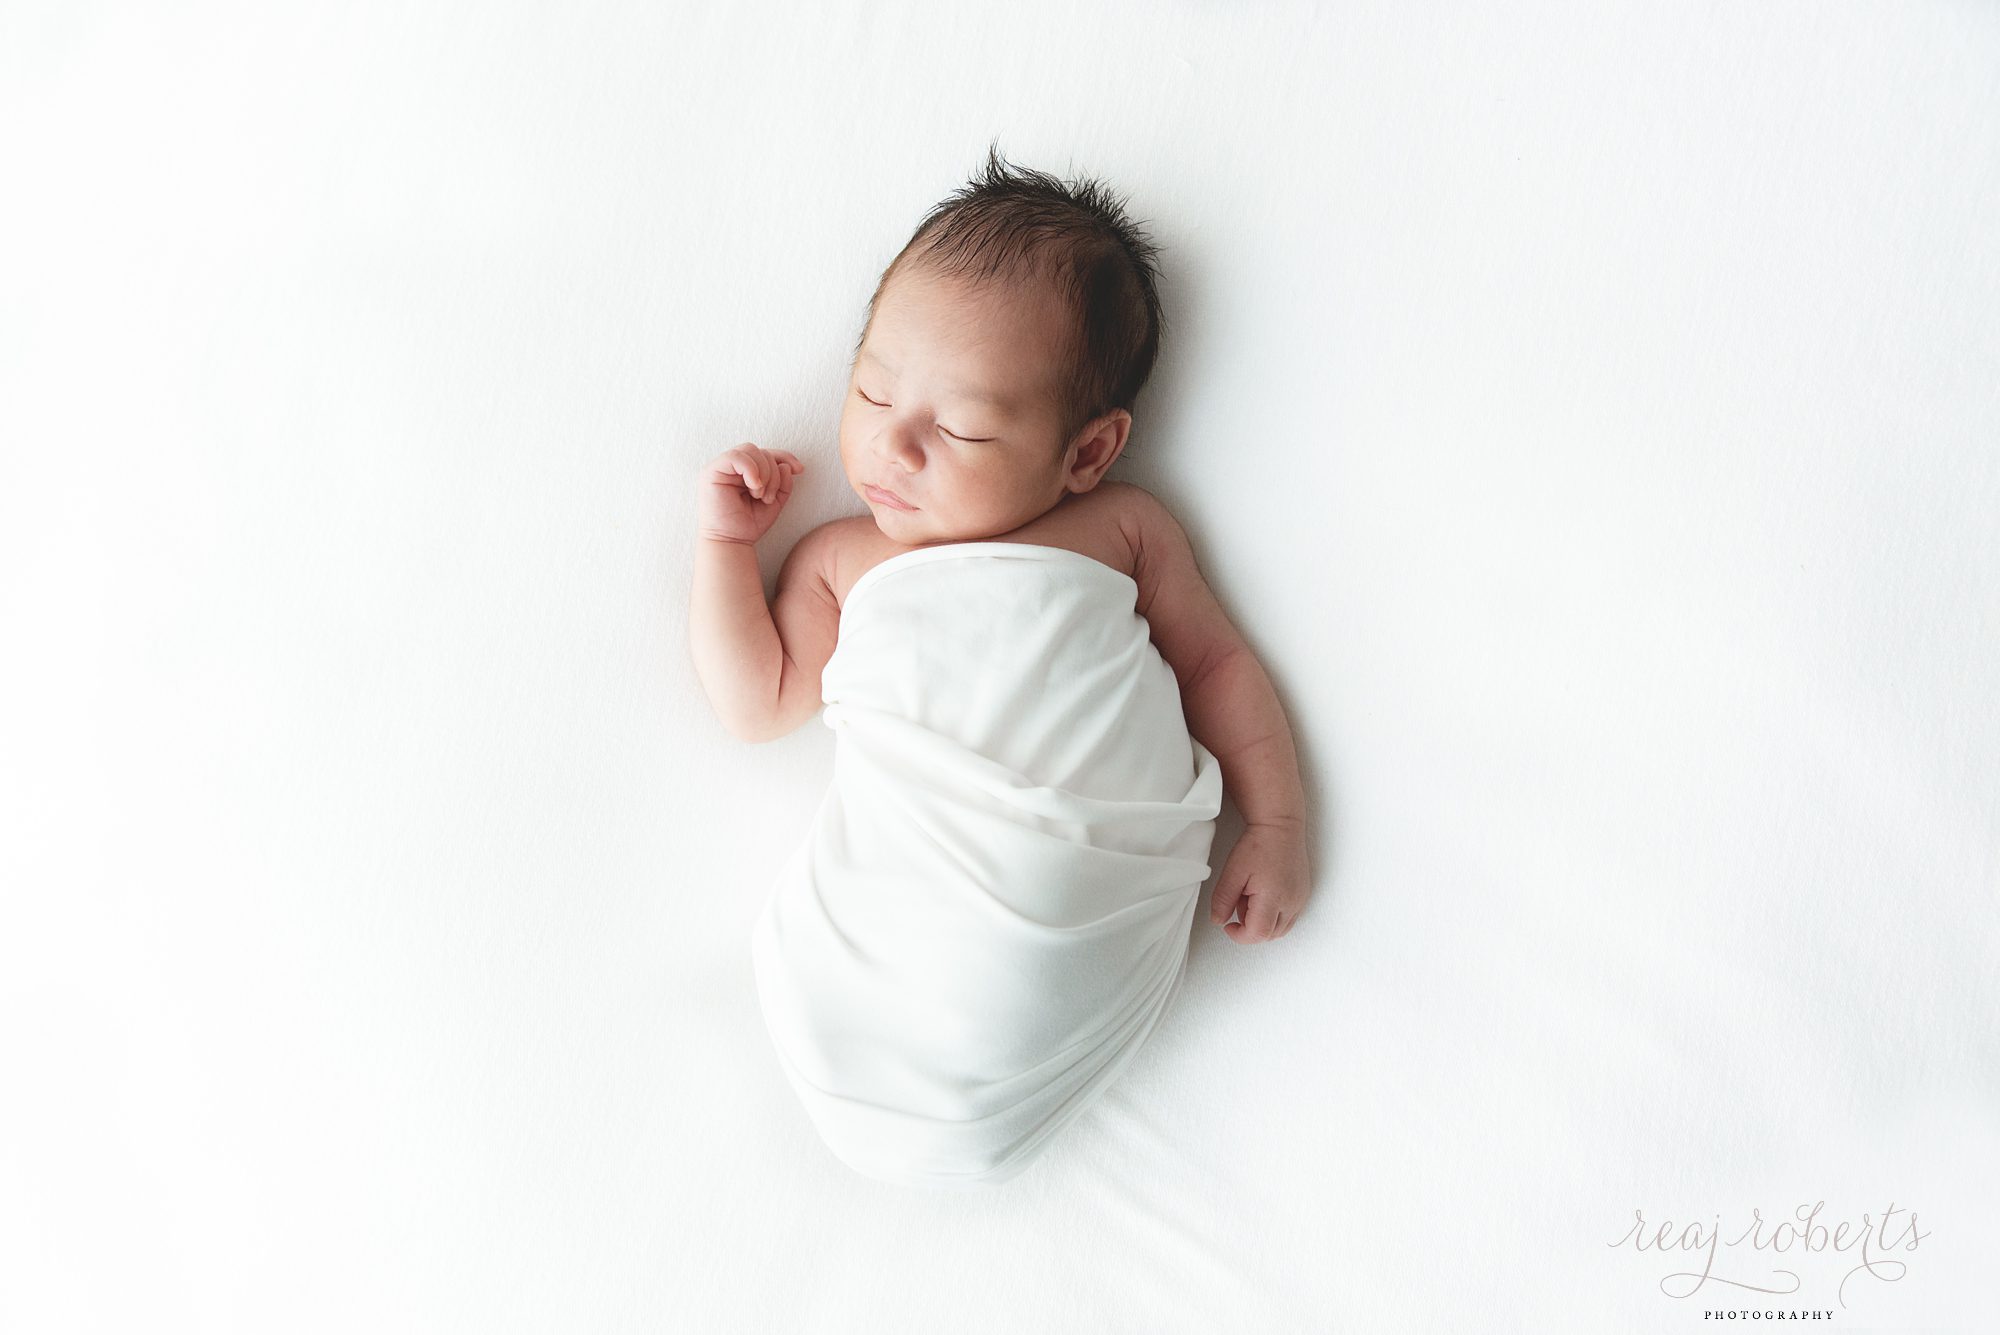 clean natural neutral newborn photographer simple baby posing baby on back swaddled | Reaj Roberts Photography